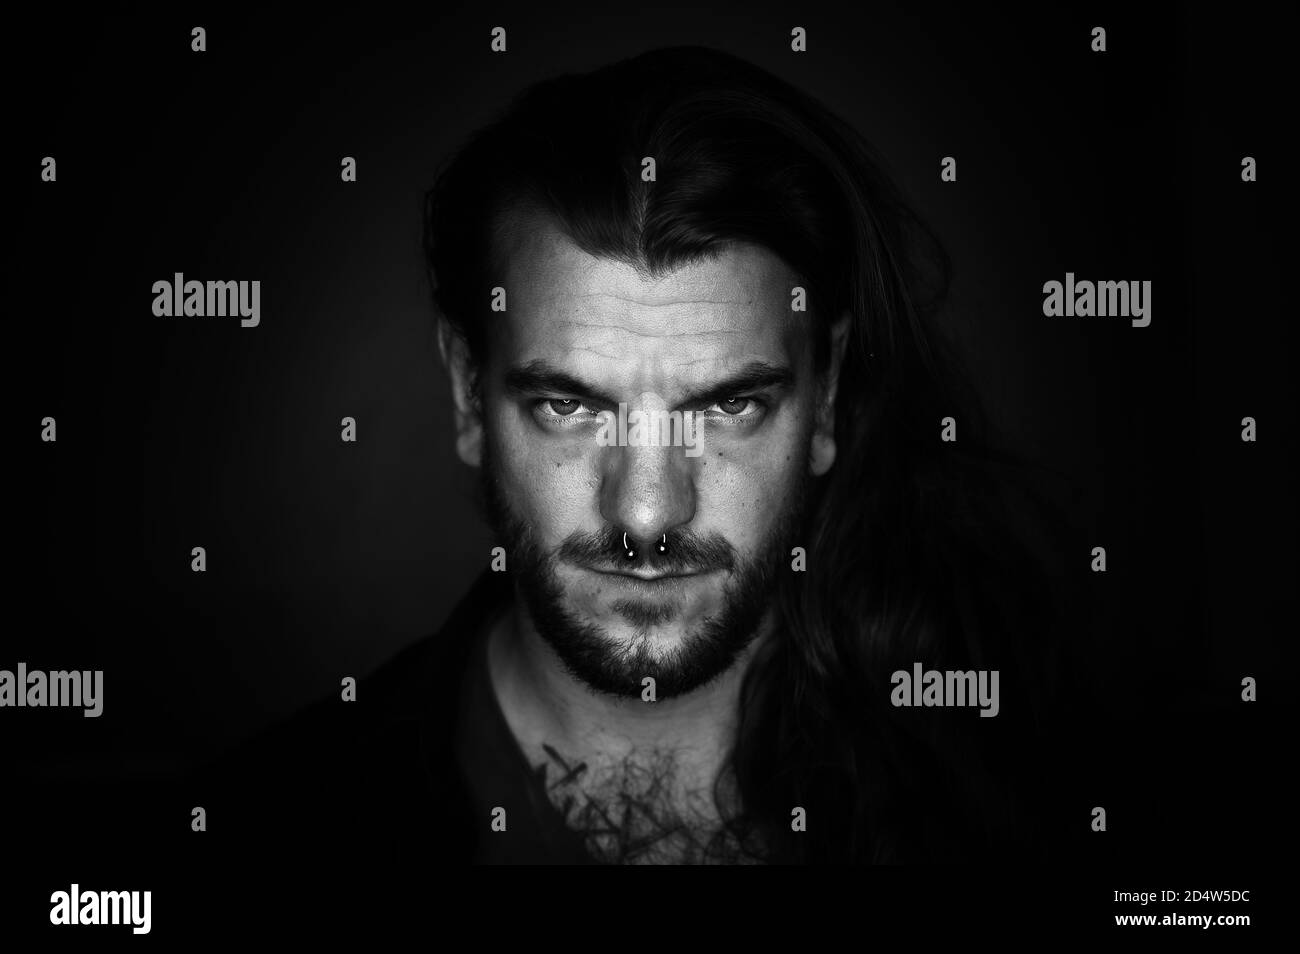 Man with long hair looks seriously and determined at the camera on an black and white image Stock Photo